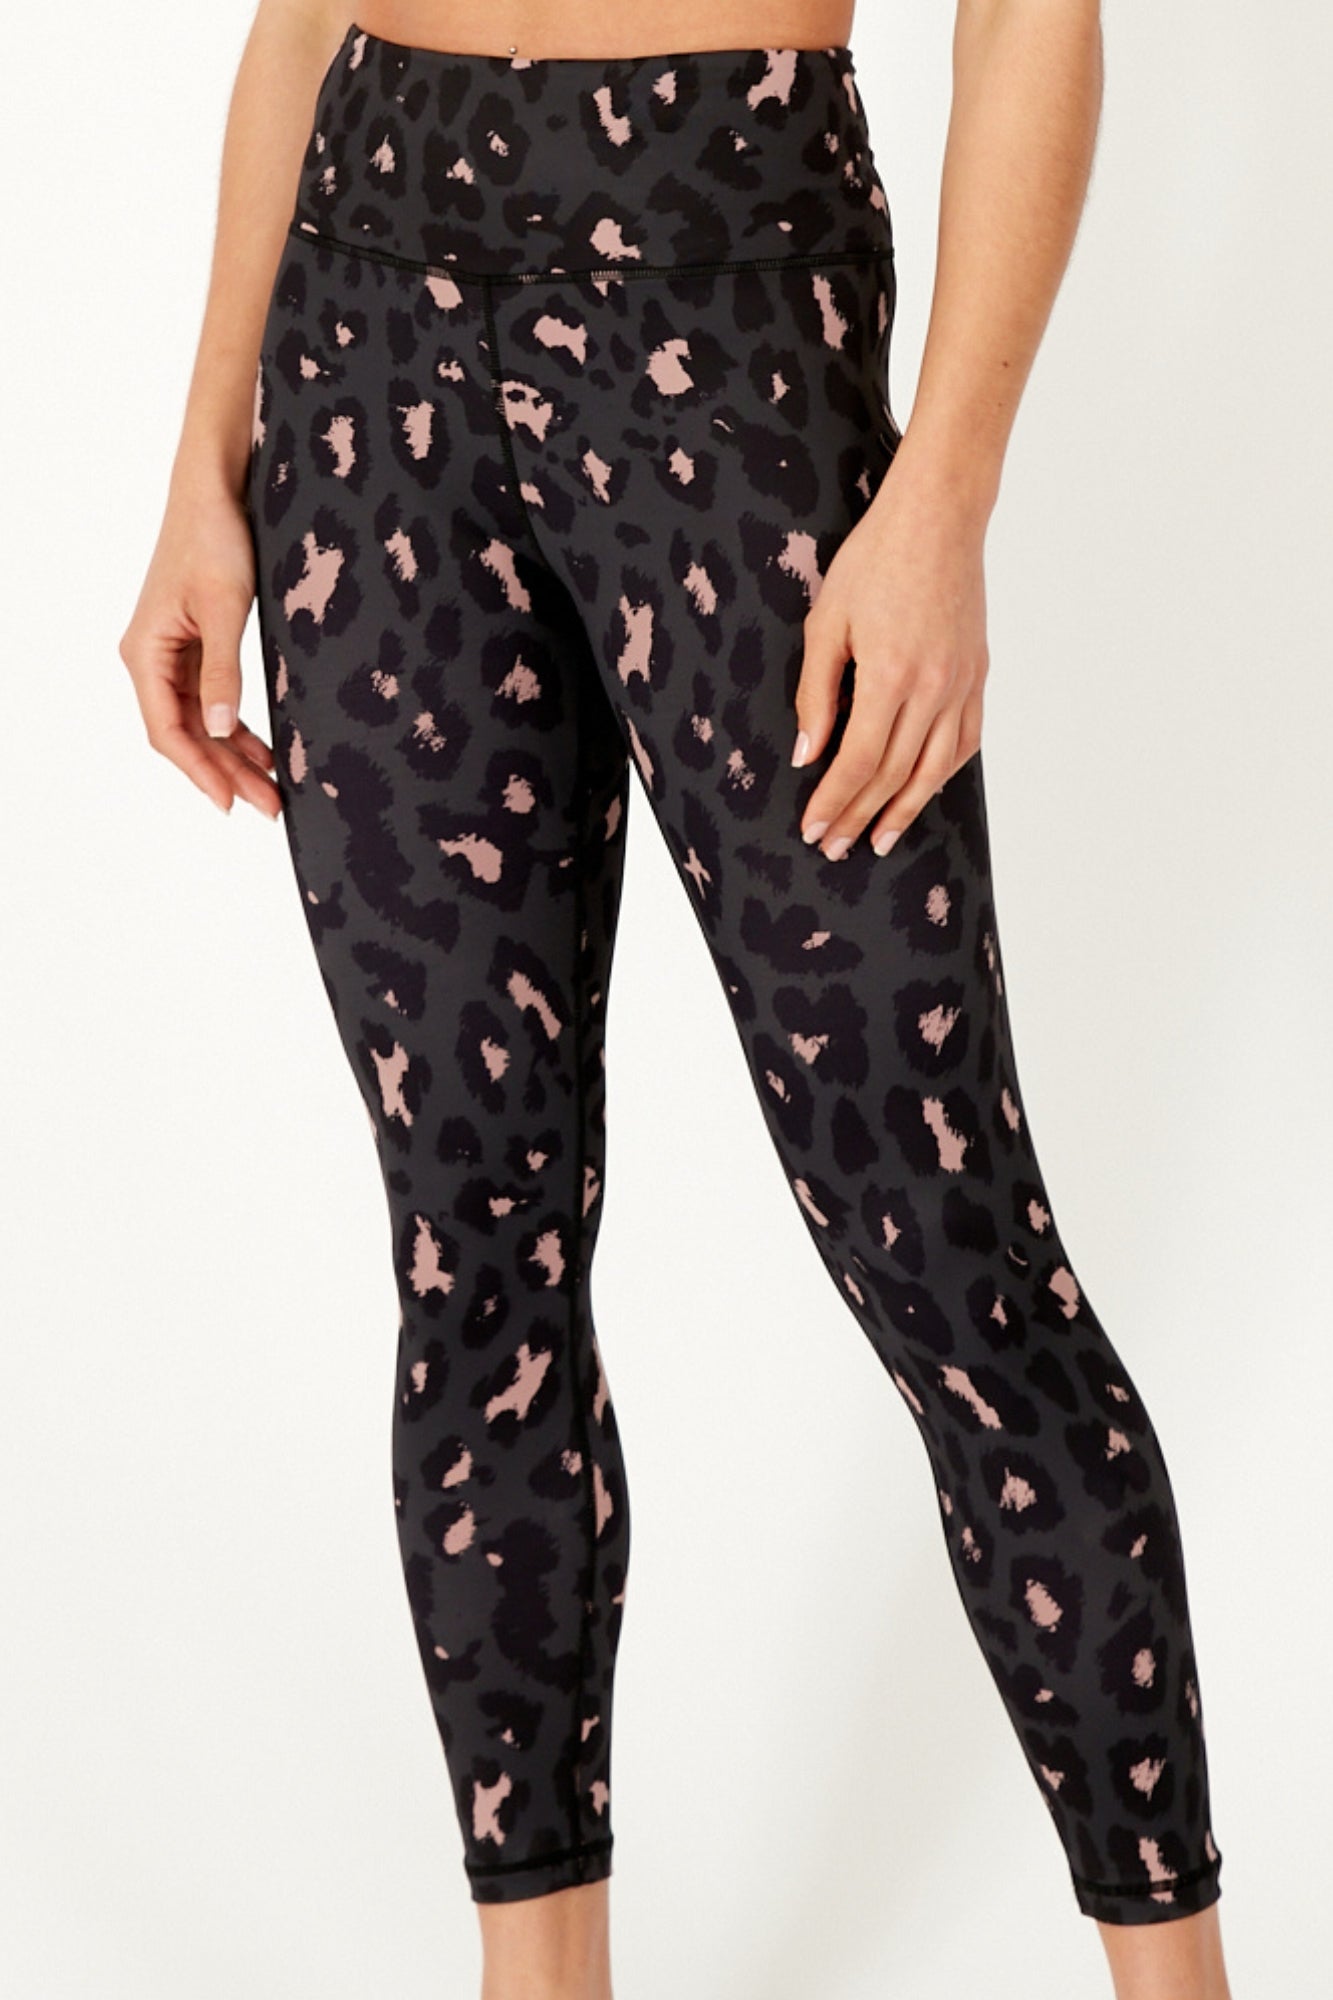 Sports leggings - Black with colourful pink leopard print